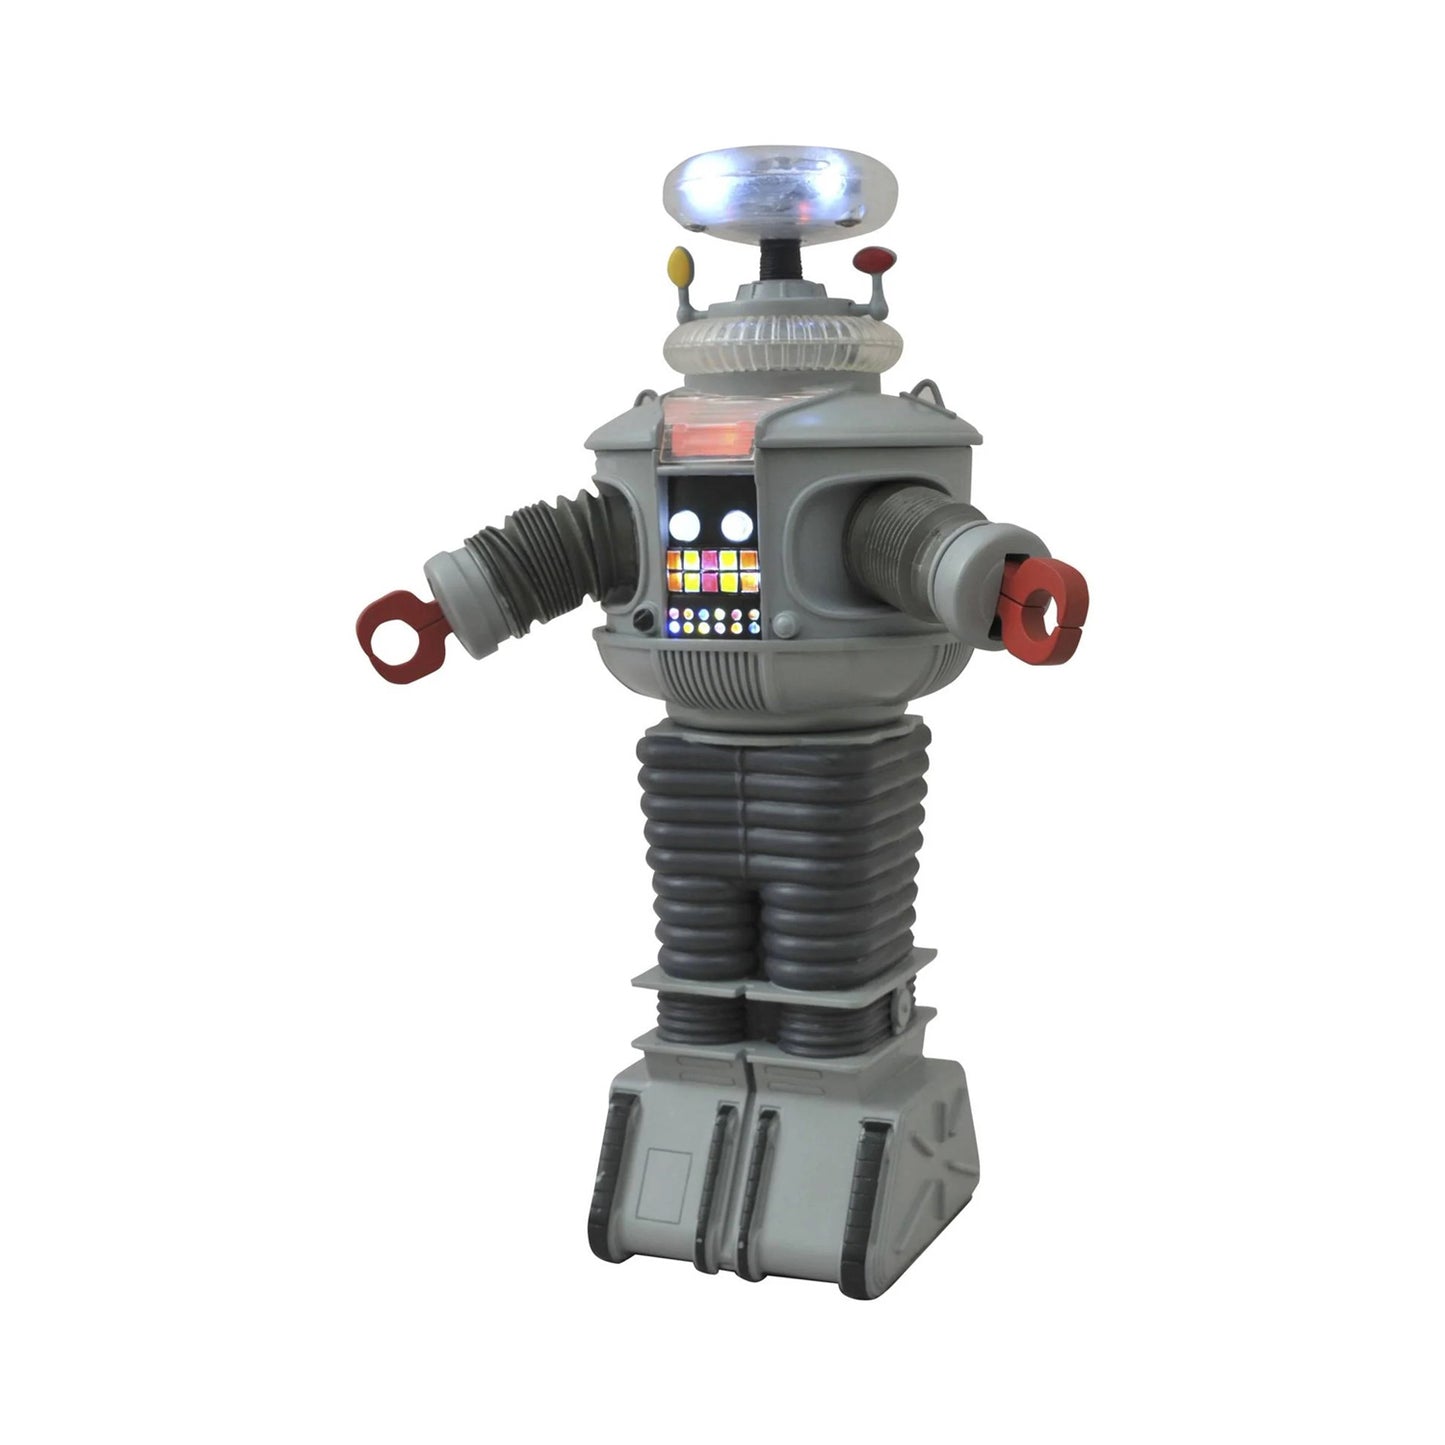 Diamond Select Lost in Space B-9 Robot Electronic Figure with Lights and Sounds